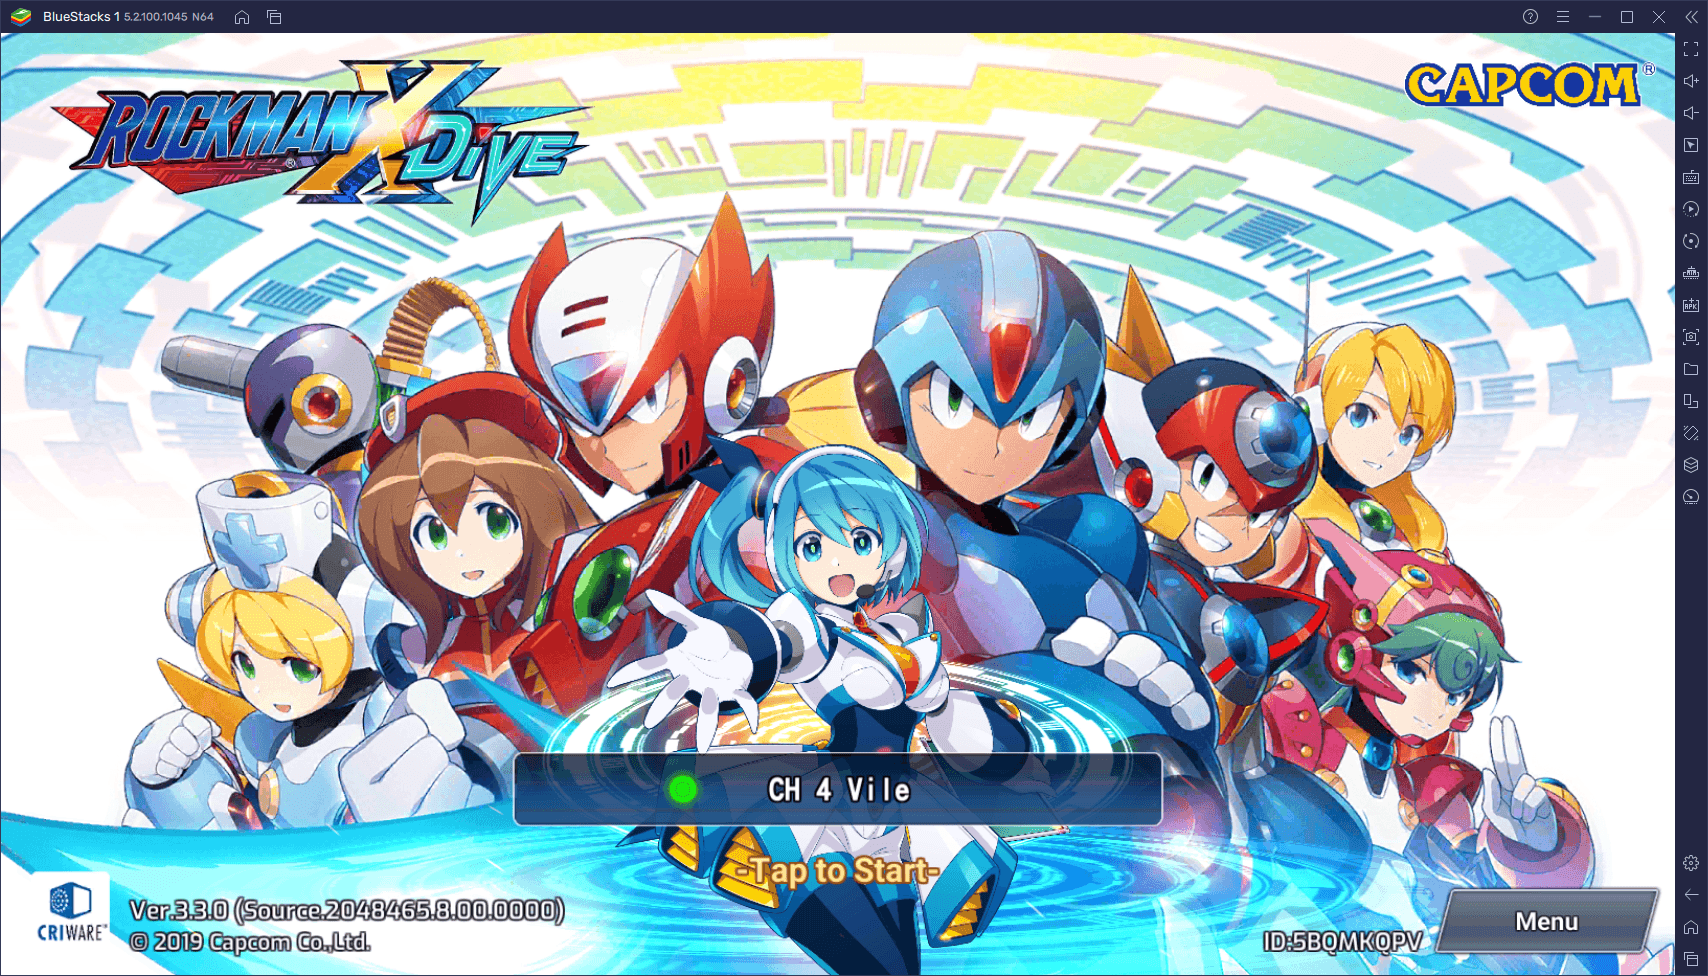 How to Reroll in MEGA MAN X DiVE - MOBILE and Obtain The Best Characters and Weapons